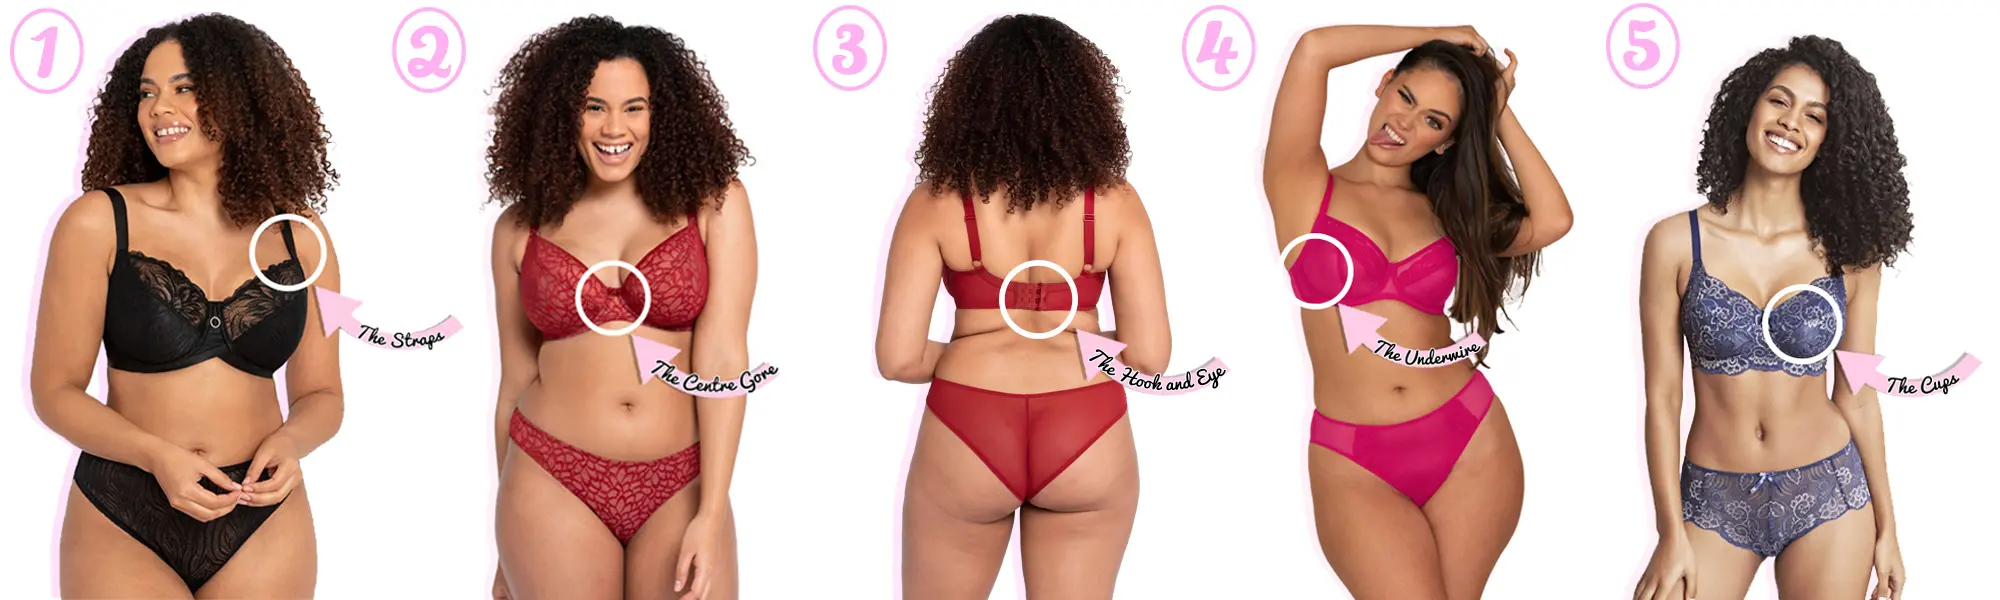 Bra Sizing 101: How to Choose the Right Bra For You - All My Friends Are  Models